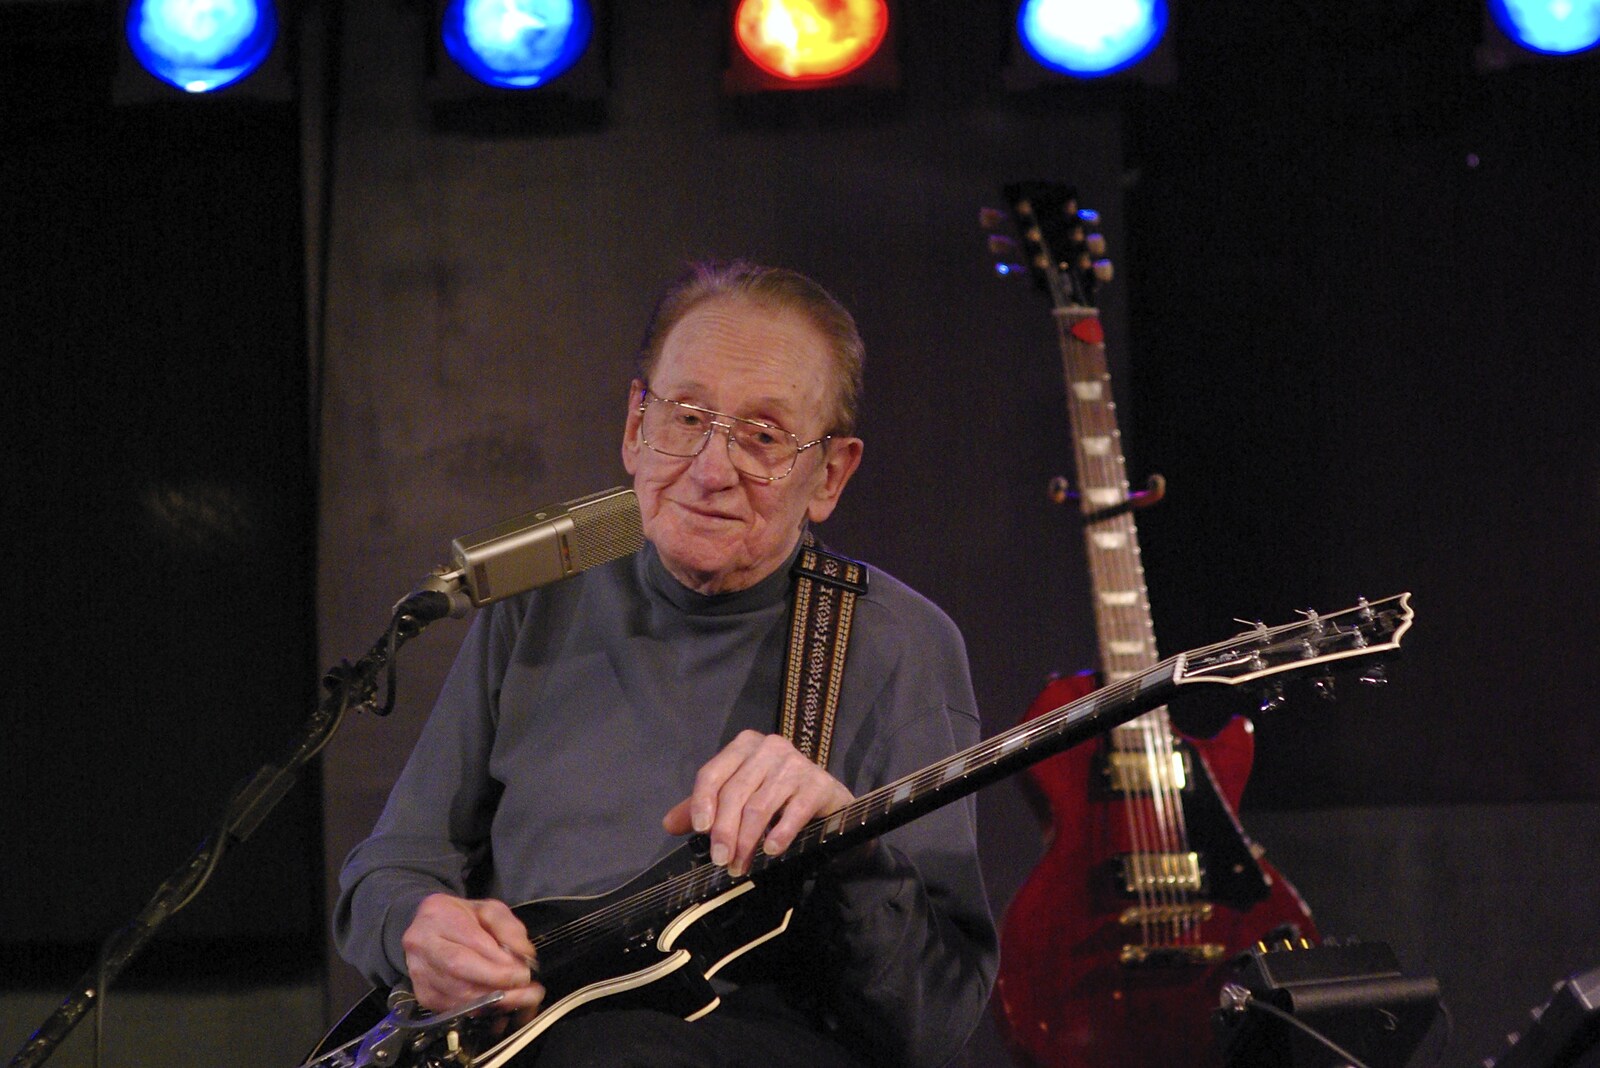 Les Paul looks a bit sad from A Central Park Marathon, Les Paul at the Iridium Club and an Empire State Sunset, New York, US - 25th March 2007